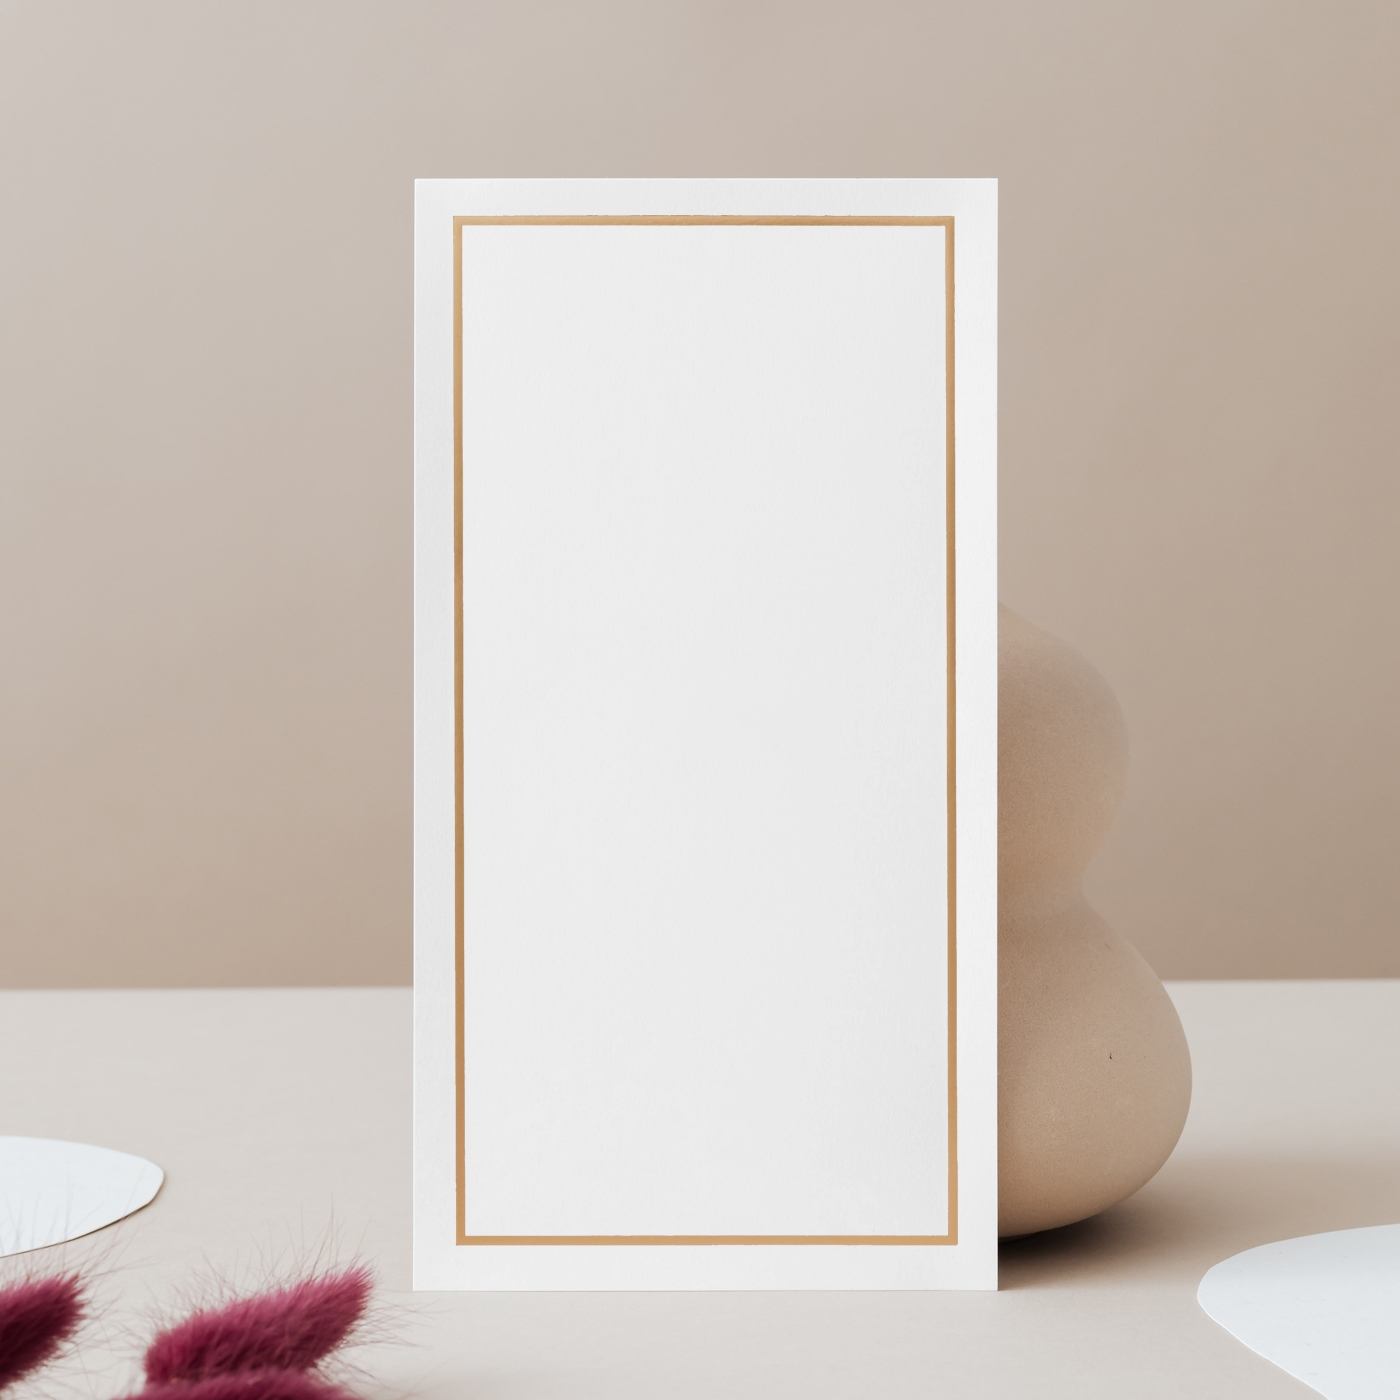 Front View of Elegant Vertical Card Mockup on Artistic Surface FREE PSD